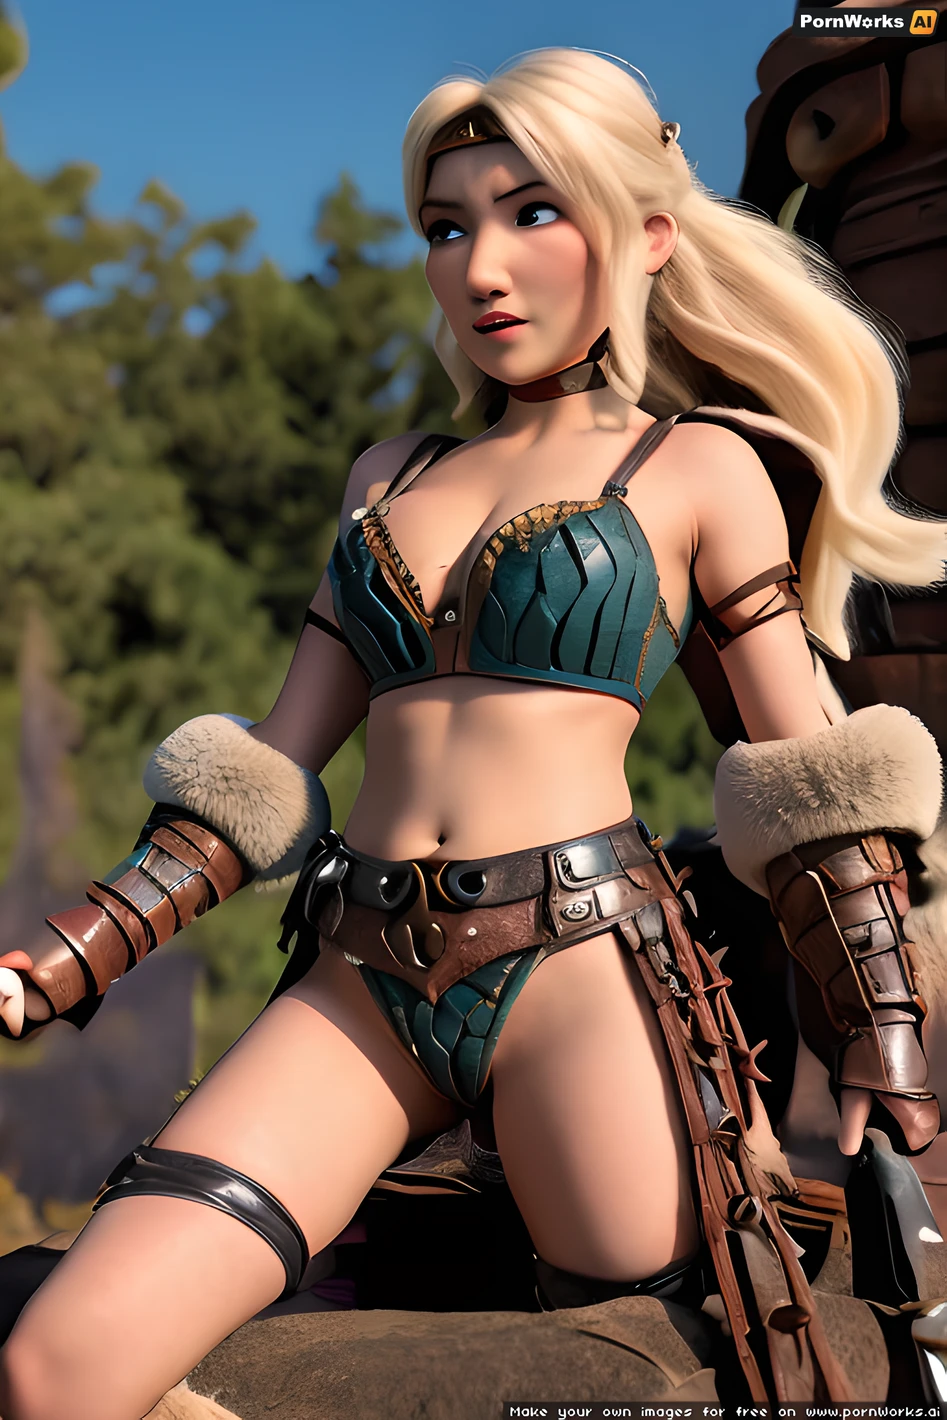 Astrid Hofferson, a warrior from Skyrim, loved using the dildo in battle.  She attached it to her dragon cock and used it to fuck Nelson Nelsonson  from Skyrim. He felt empowered by